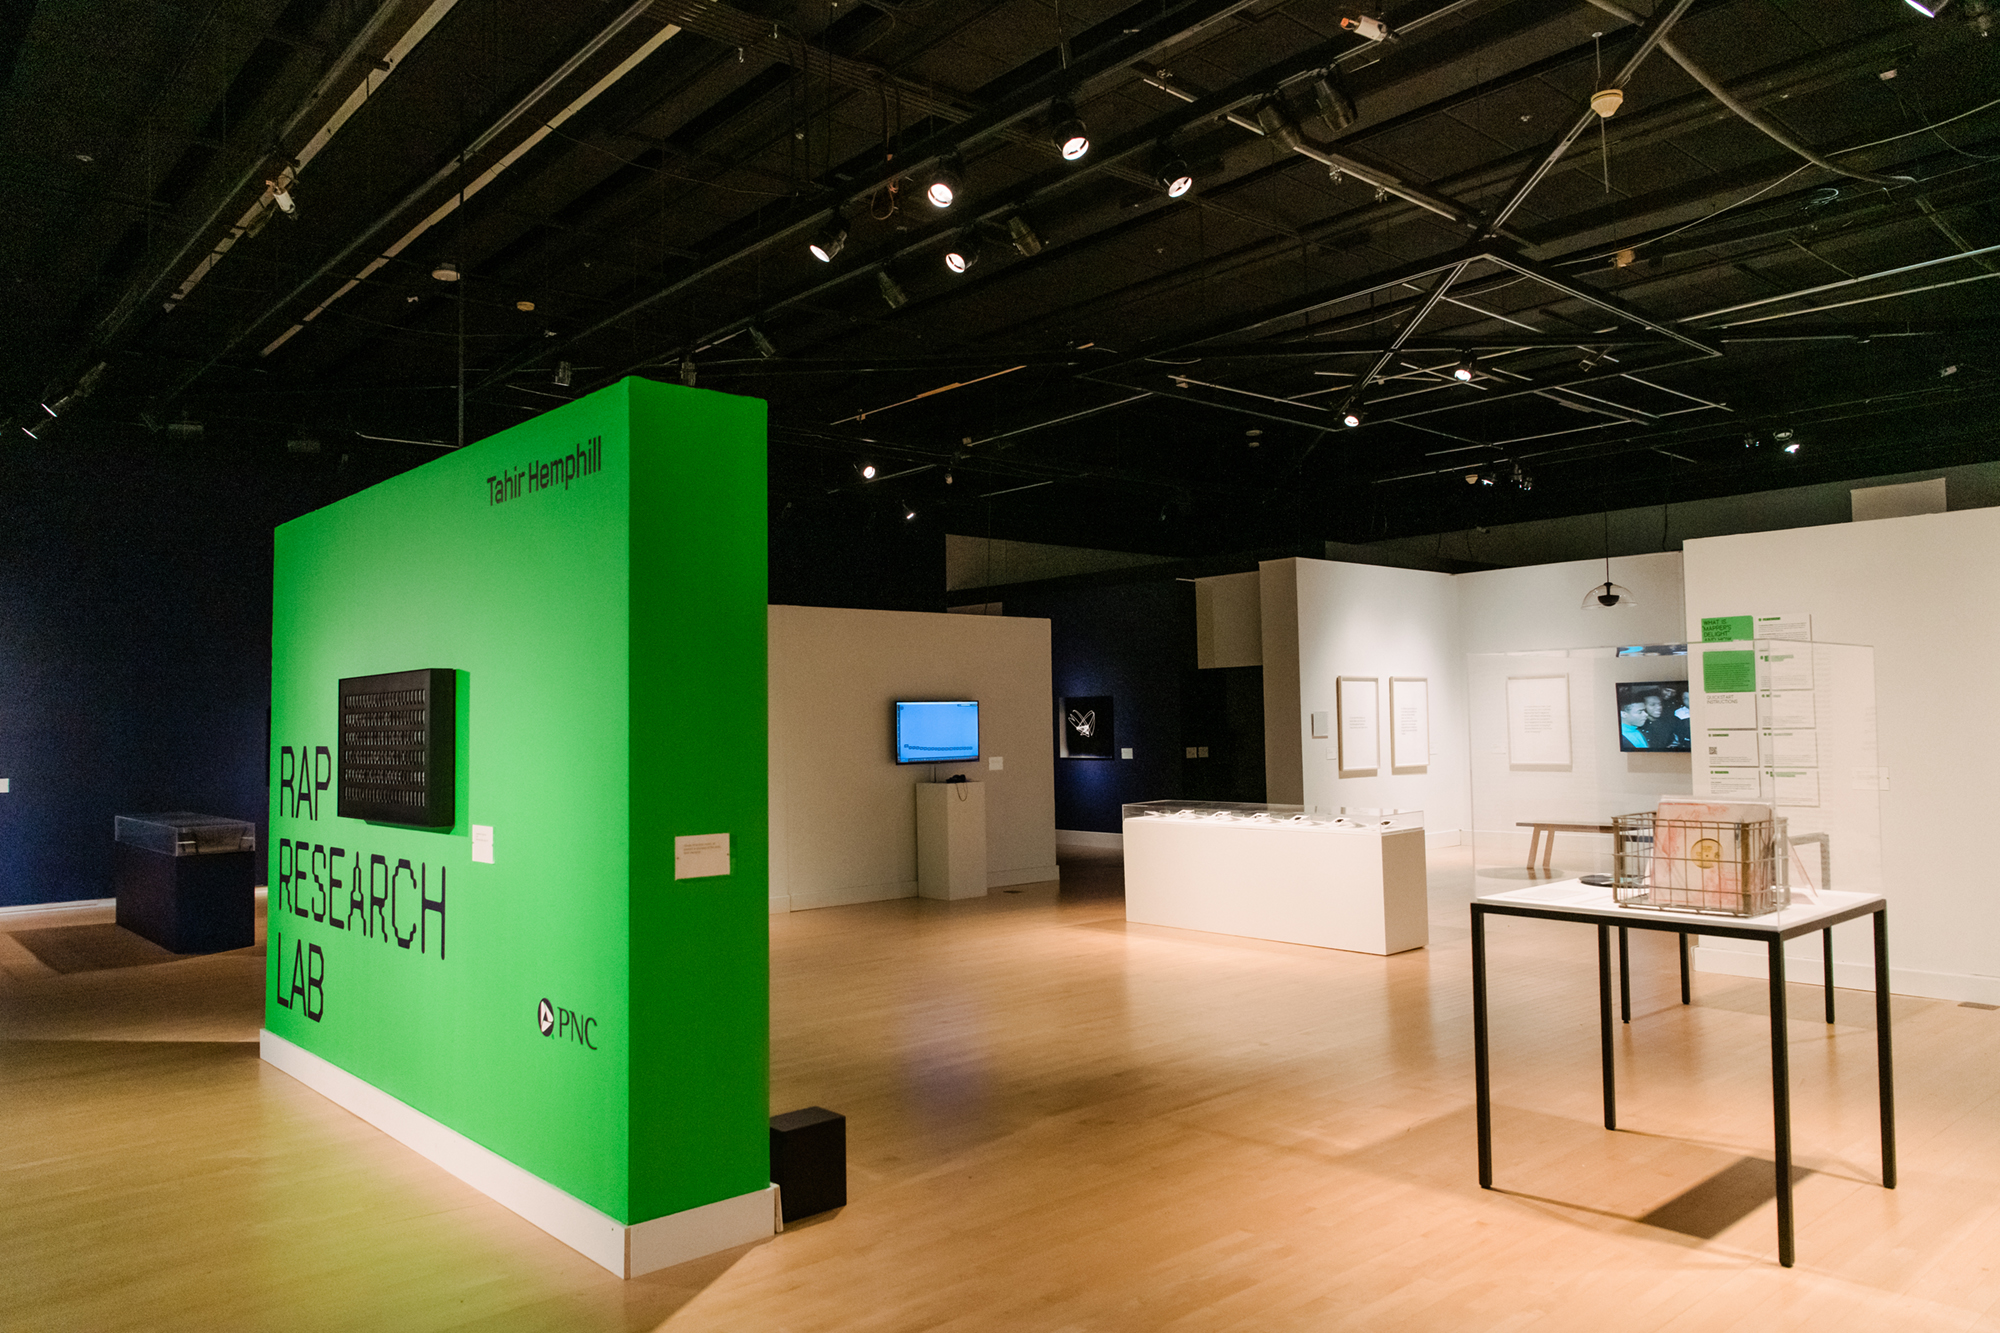 A view of an art gallery shows a green panel with words Rap Research Lab